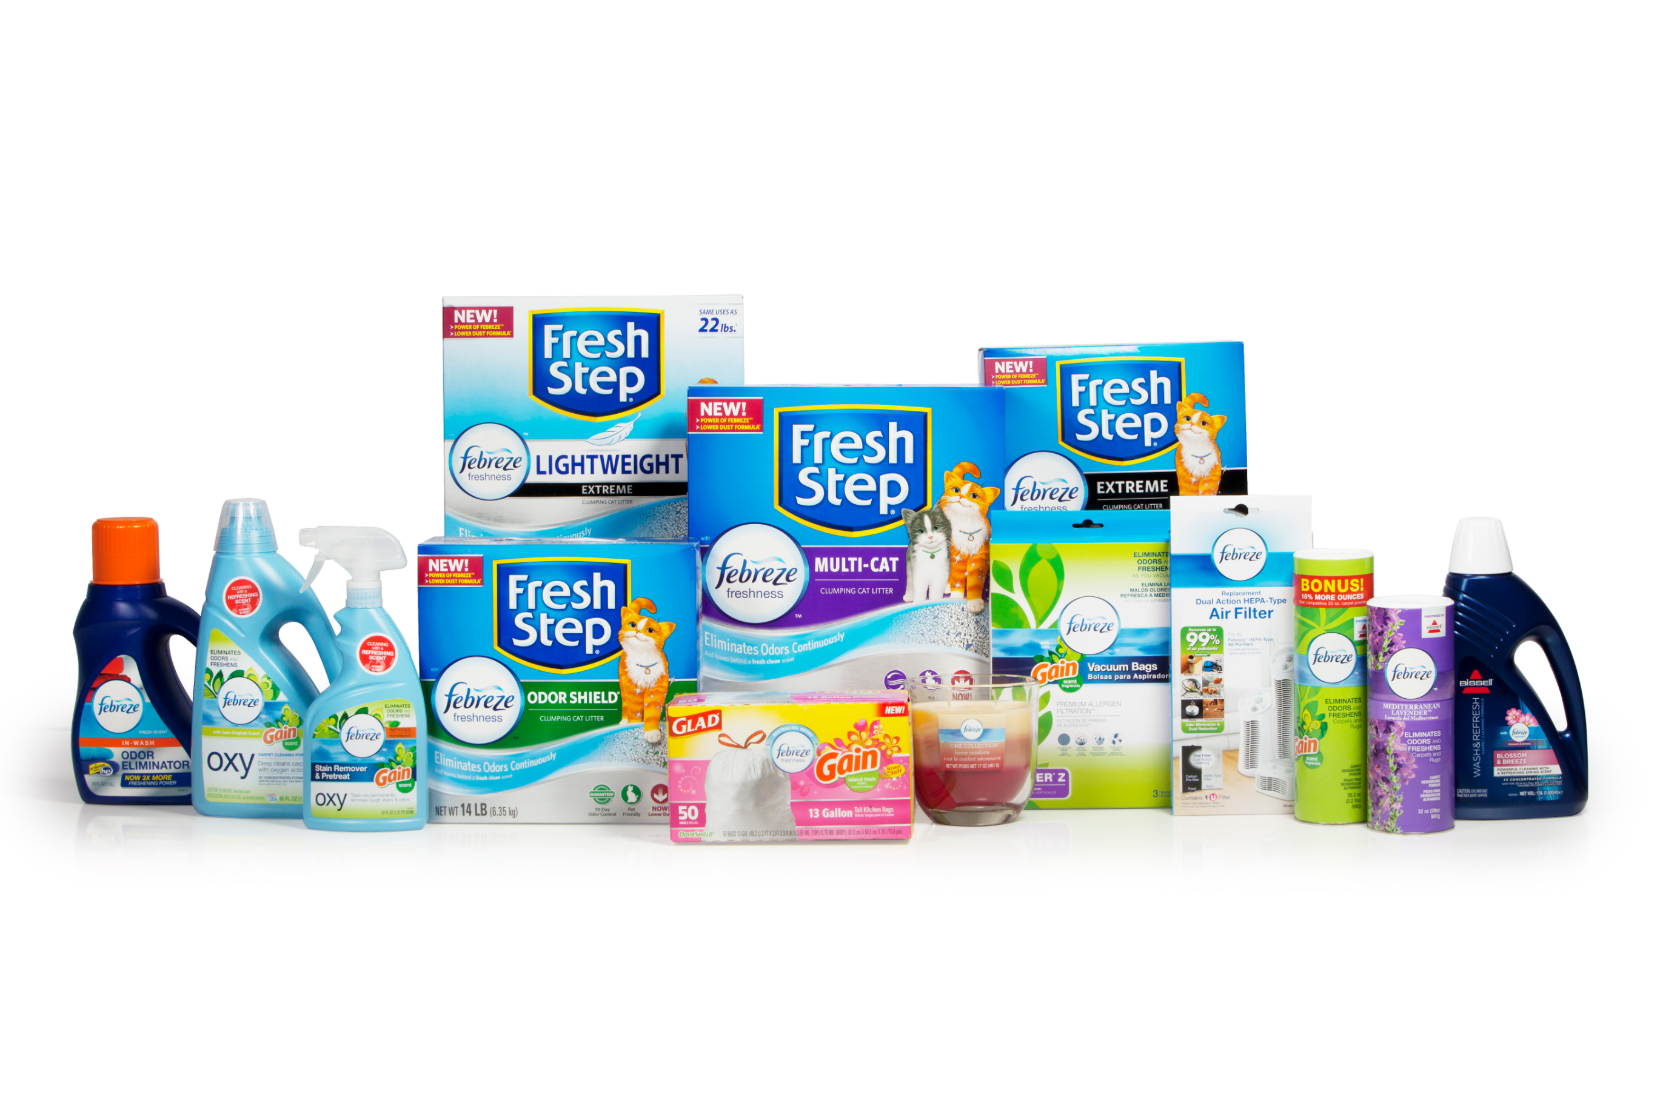 Procter & Gamble Europe household product info site